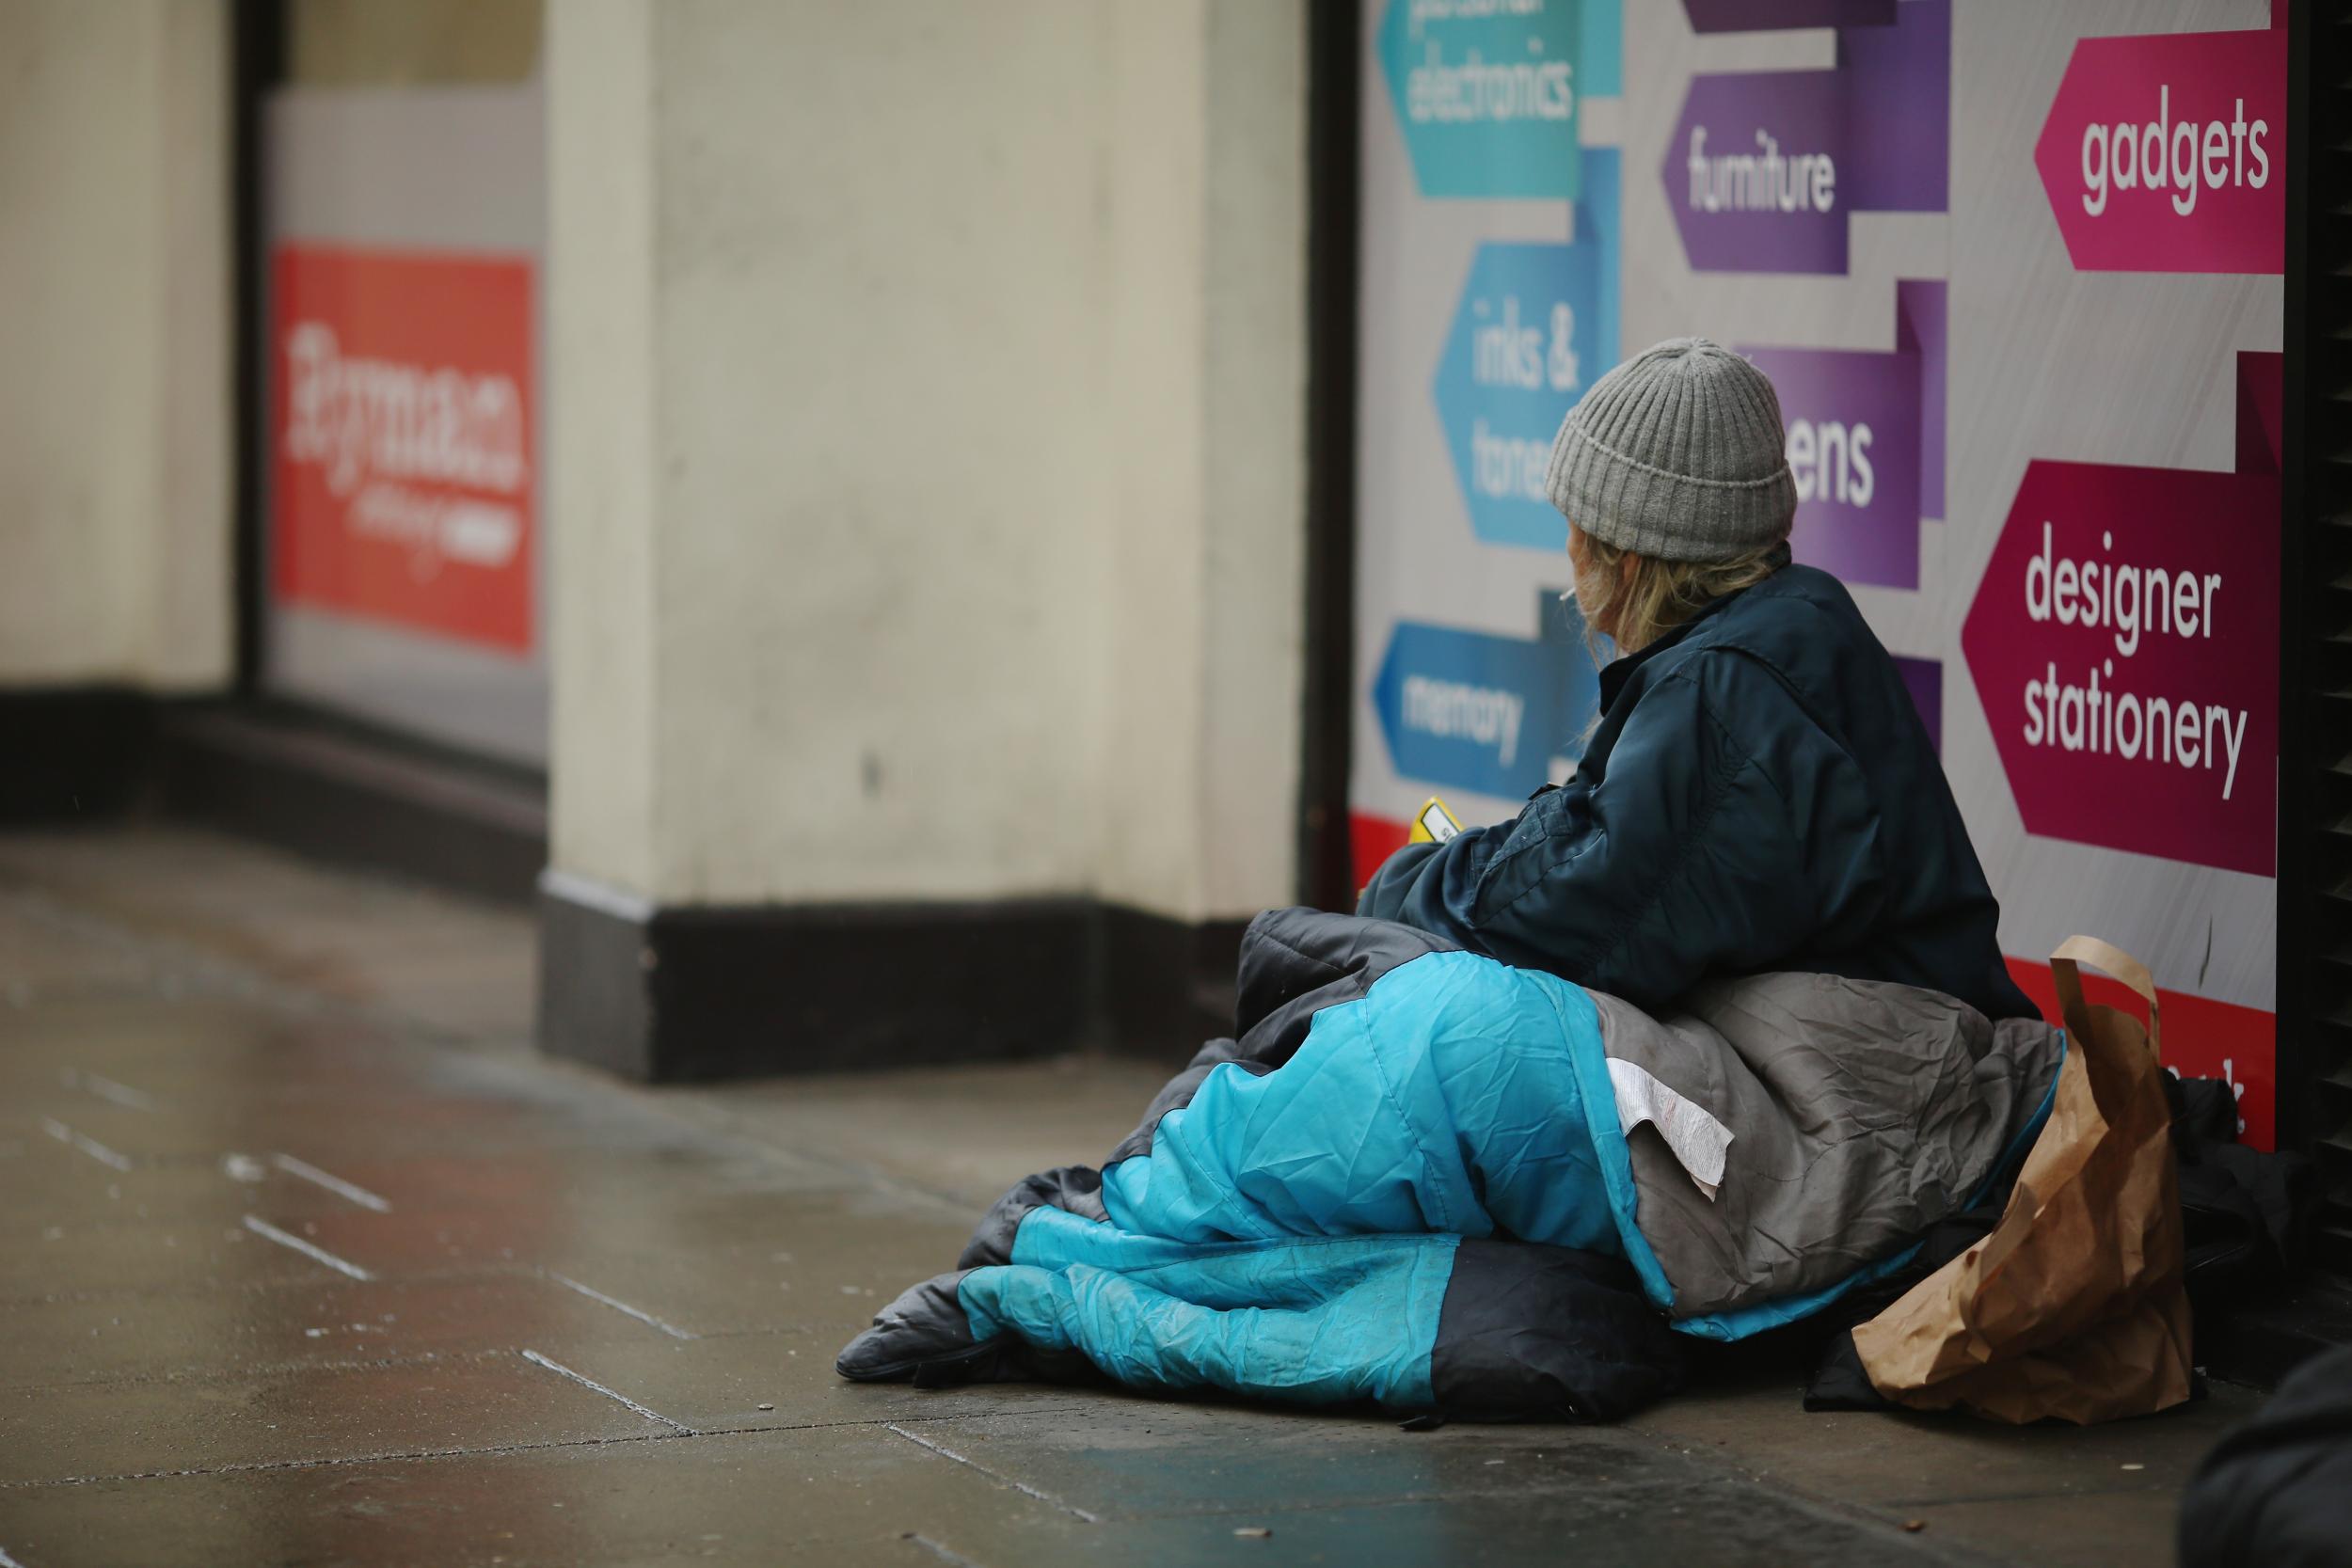 The bill requires local authorities to help anyone 56 days away from homelessness secure accommodation